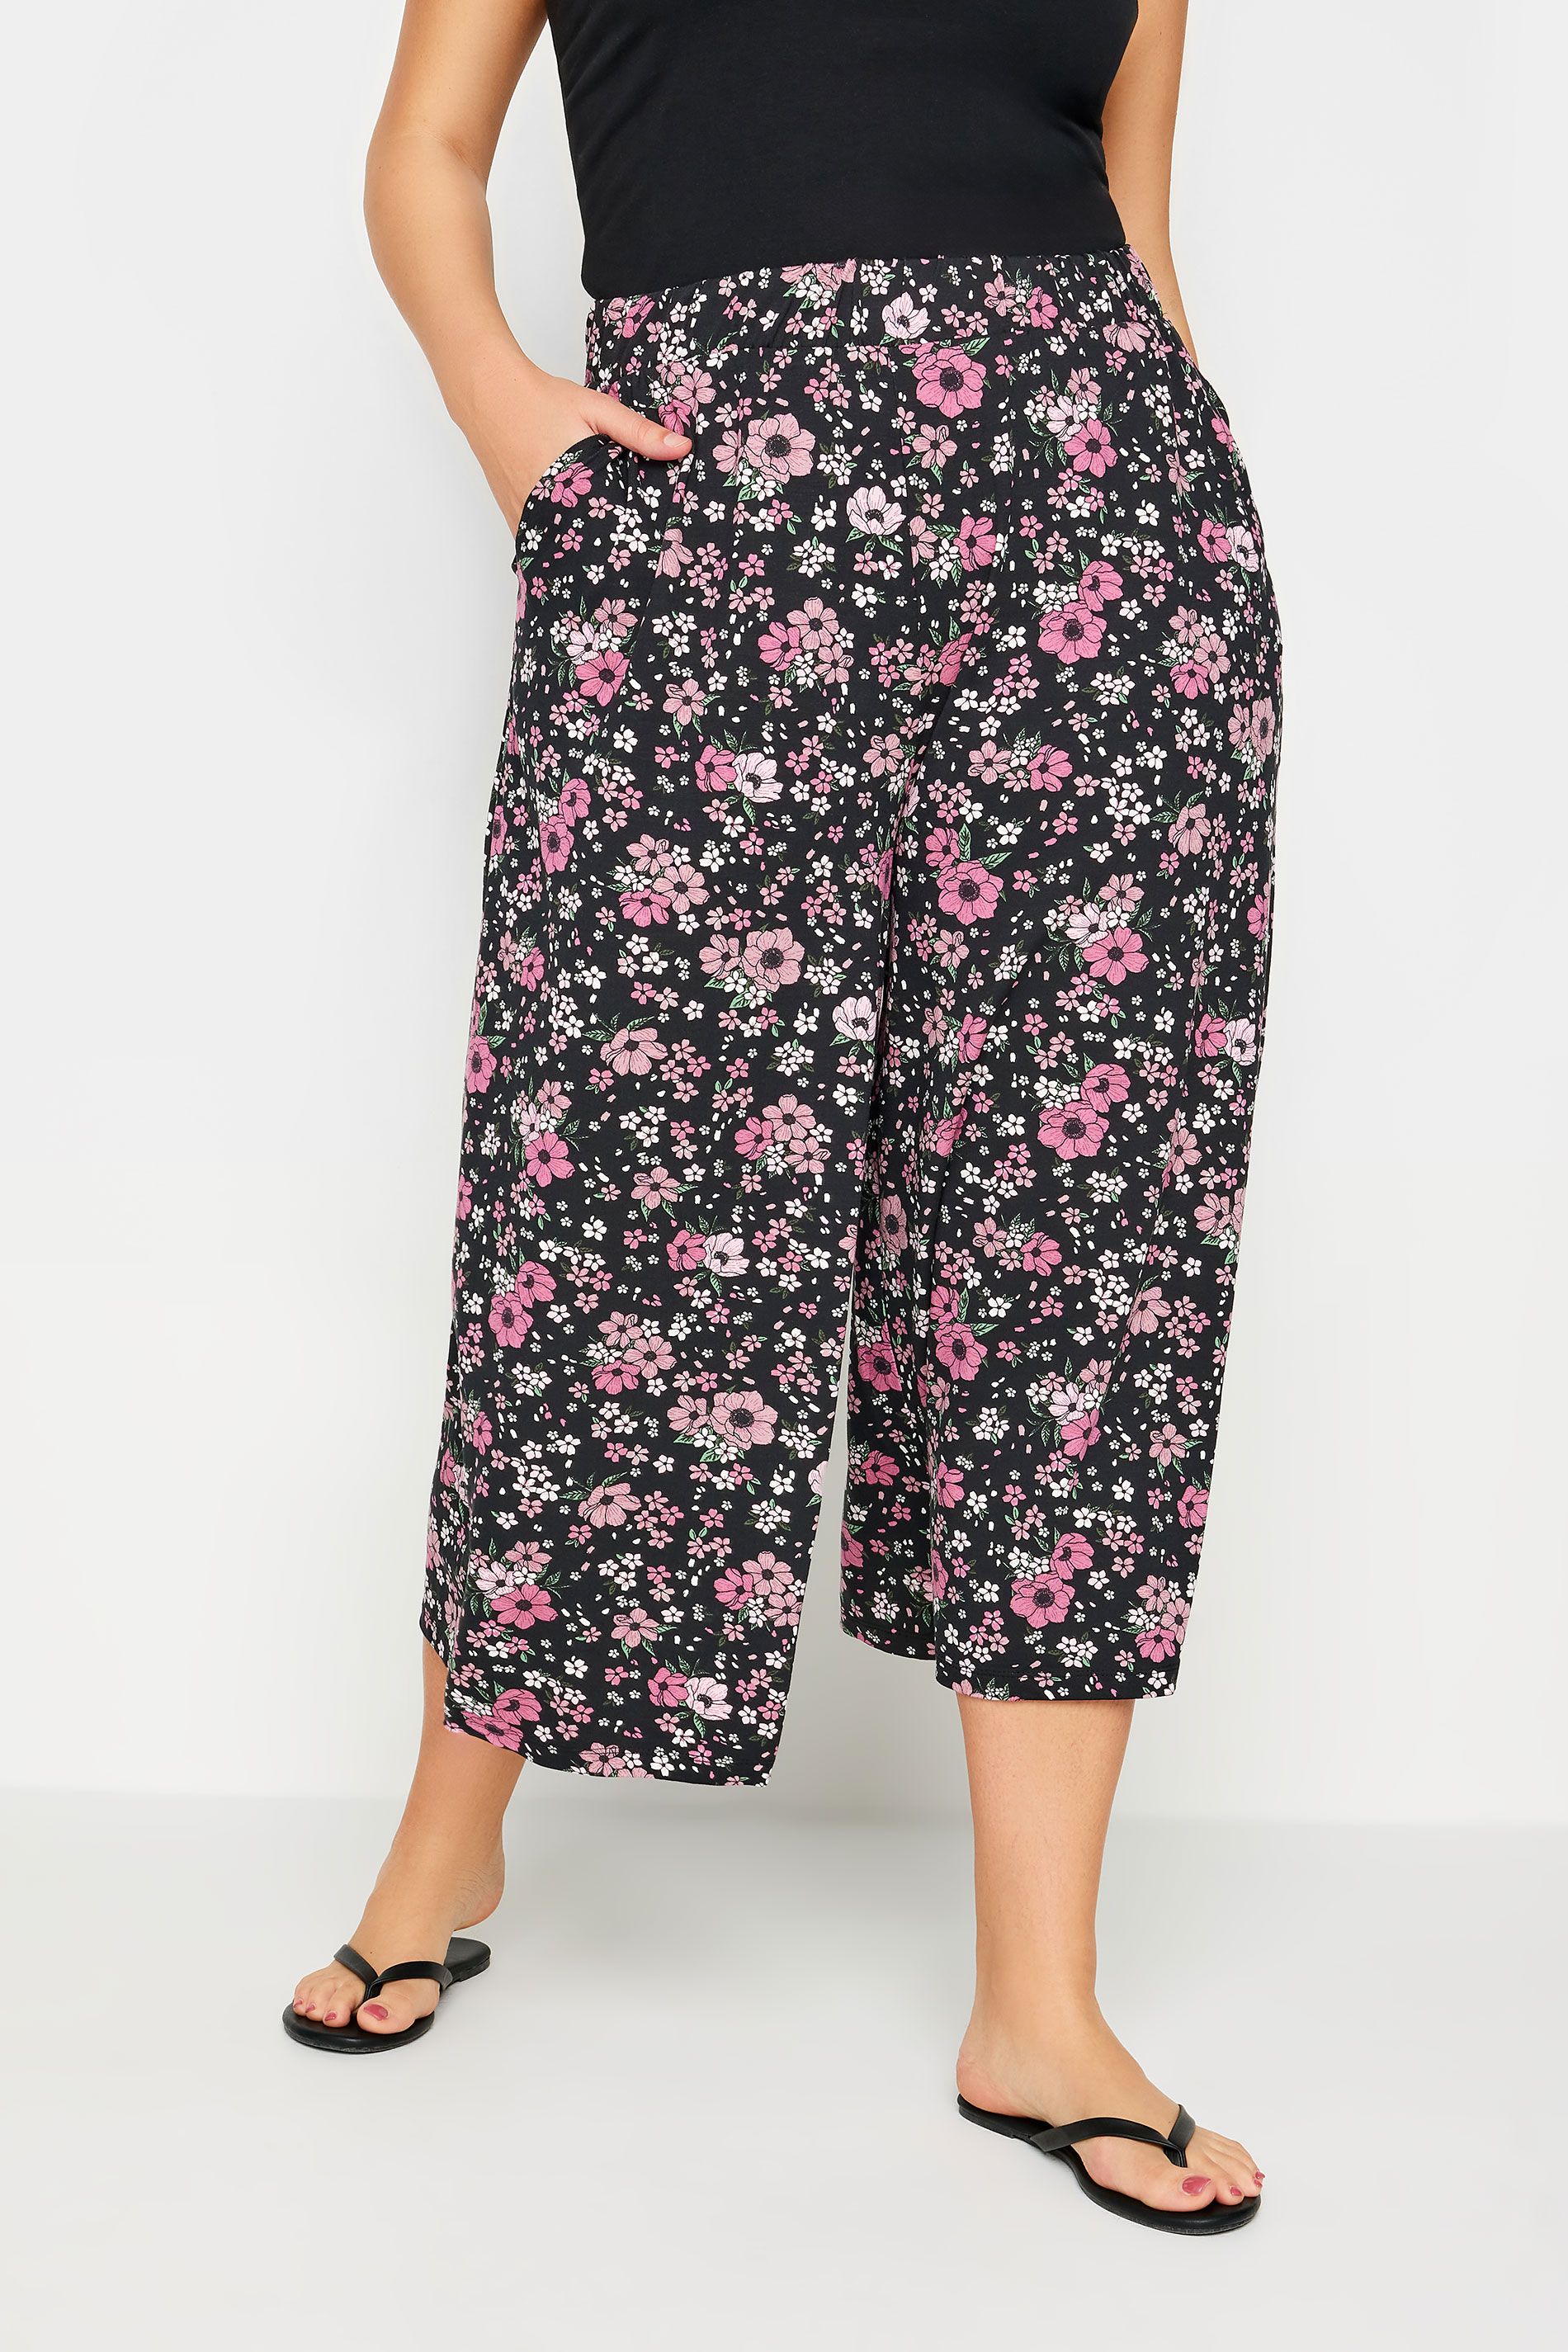 YOURS Plus Size Black Floral Print Midaxi Culottes | Yours Clothing 1